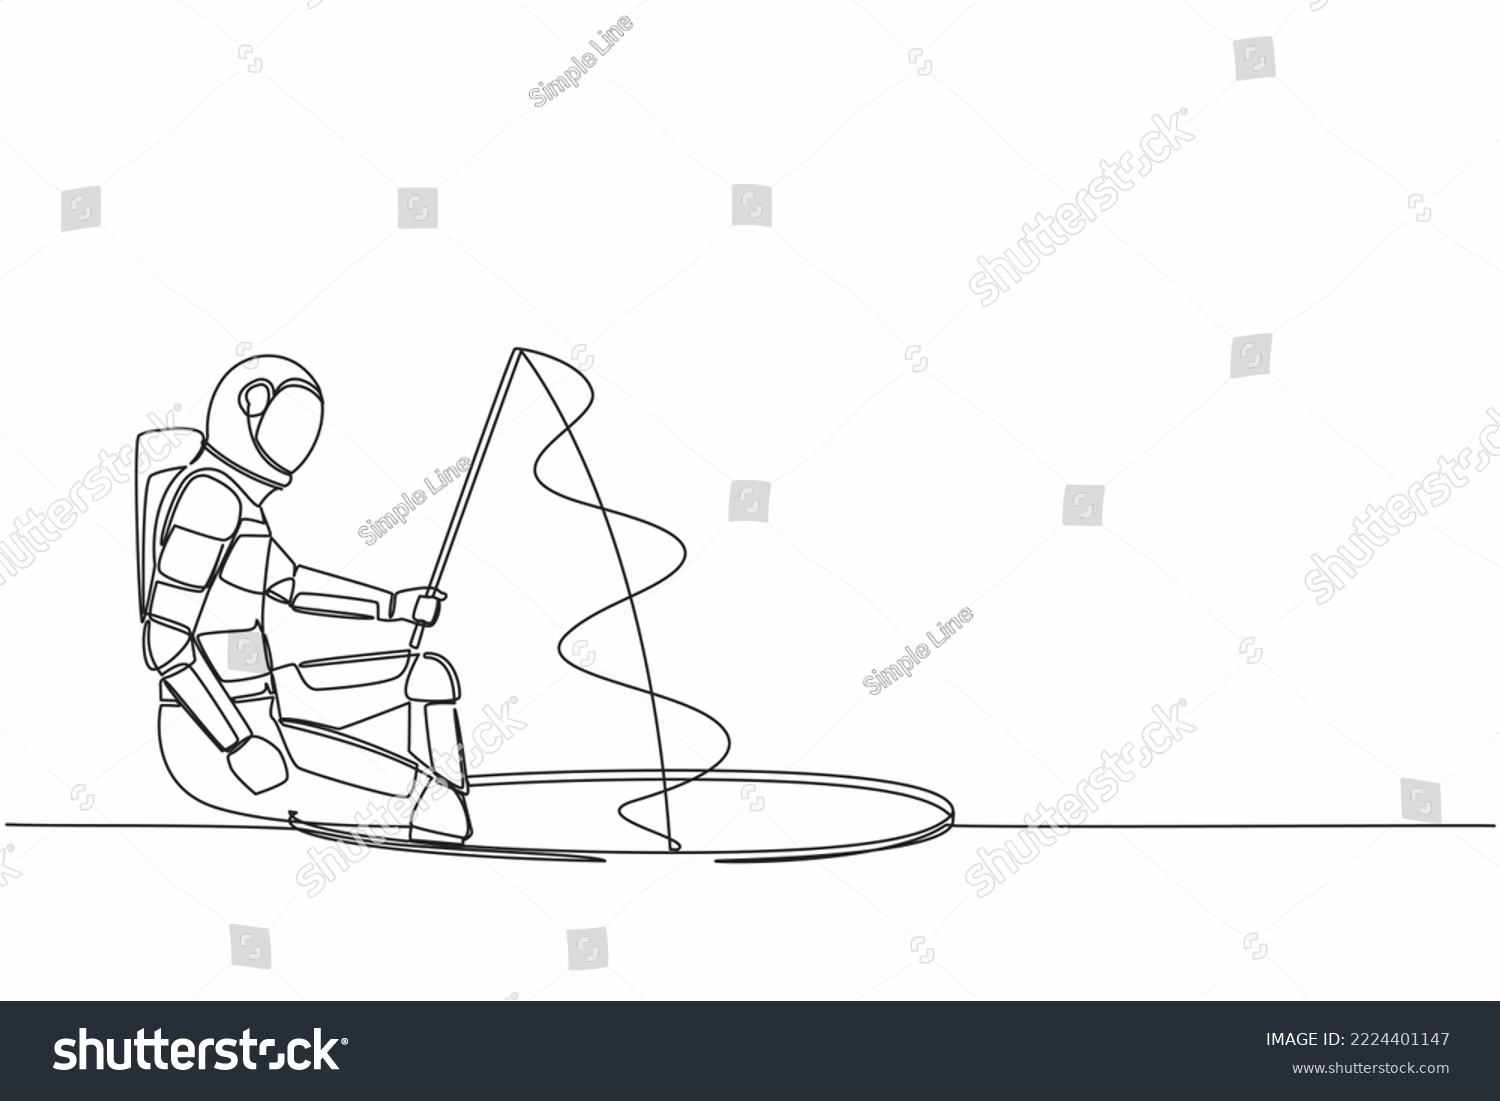 SVG of Single one line drawing young astronaut holding fishing rod from hole. Space business investment. Make money from idea. Cosmic galaxy space concept. Continuous line graphic design vector illustration svg